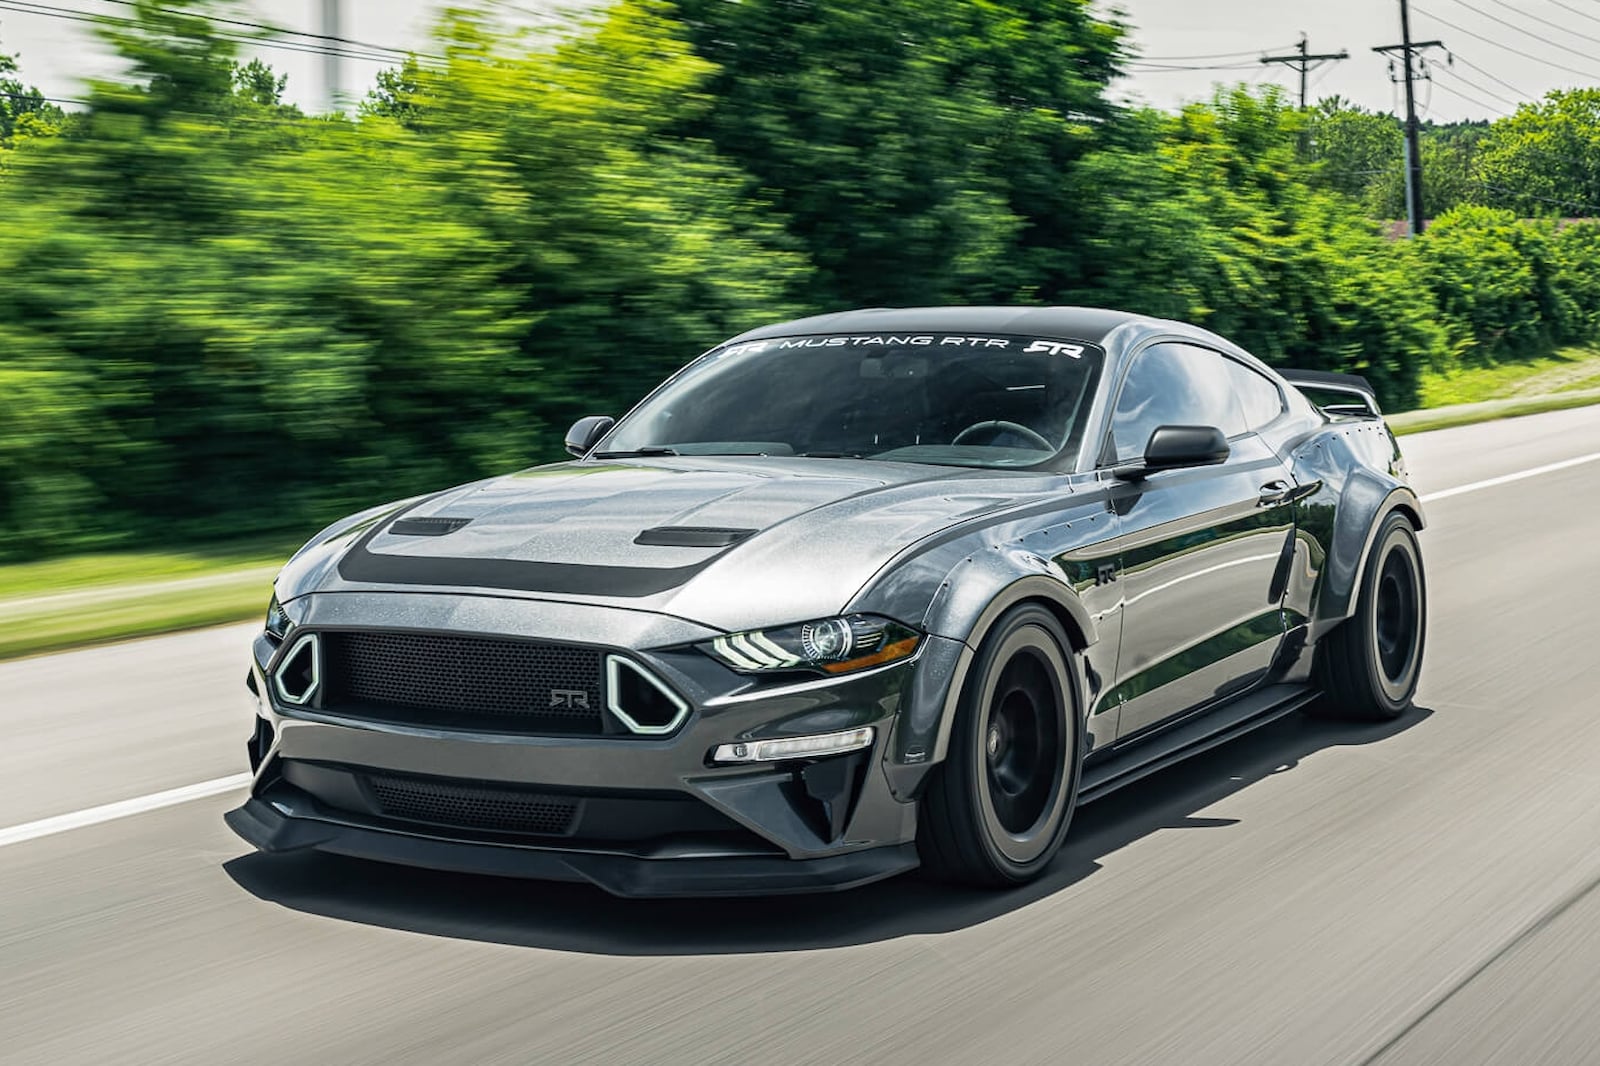 RTR Spec 5 Is Your 750-HP Shelby GT500 Alternative